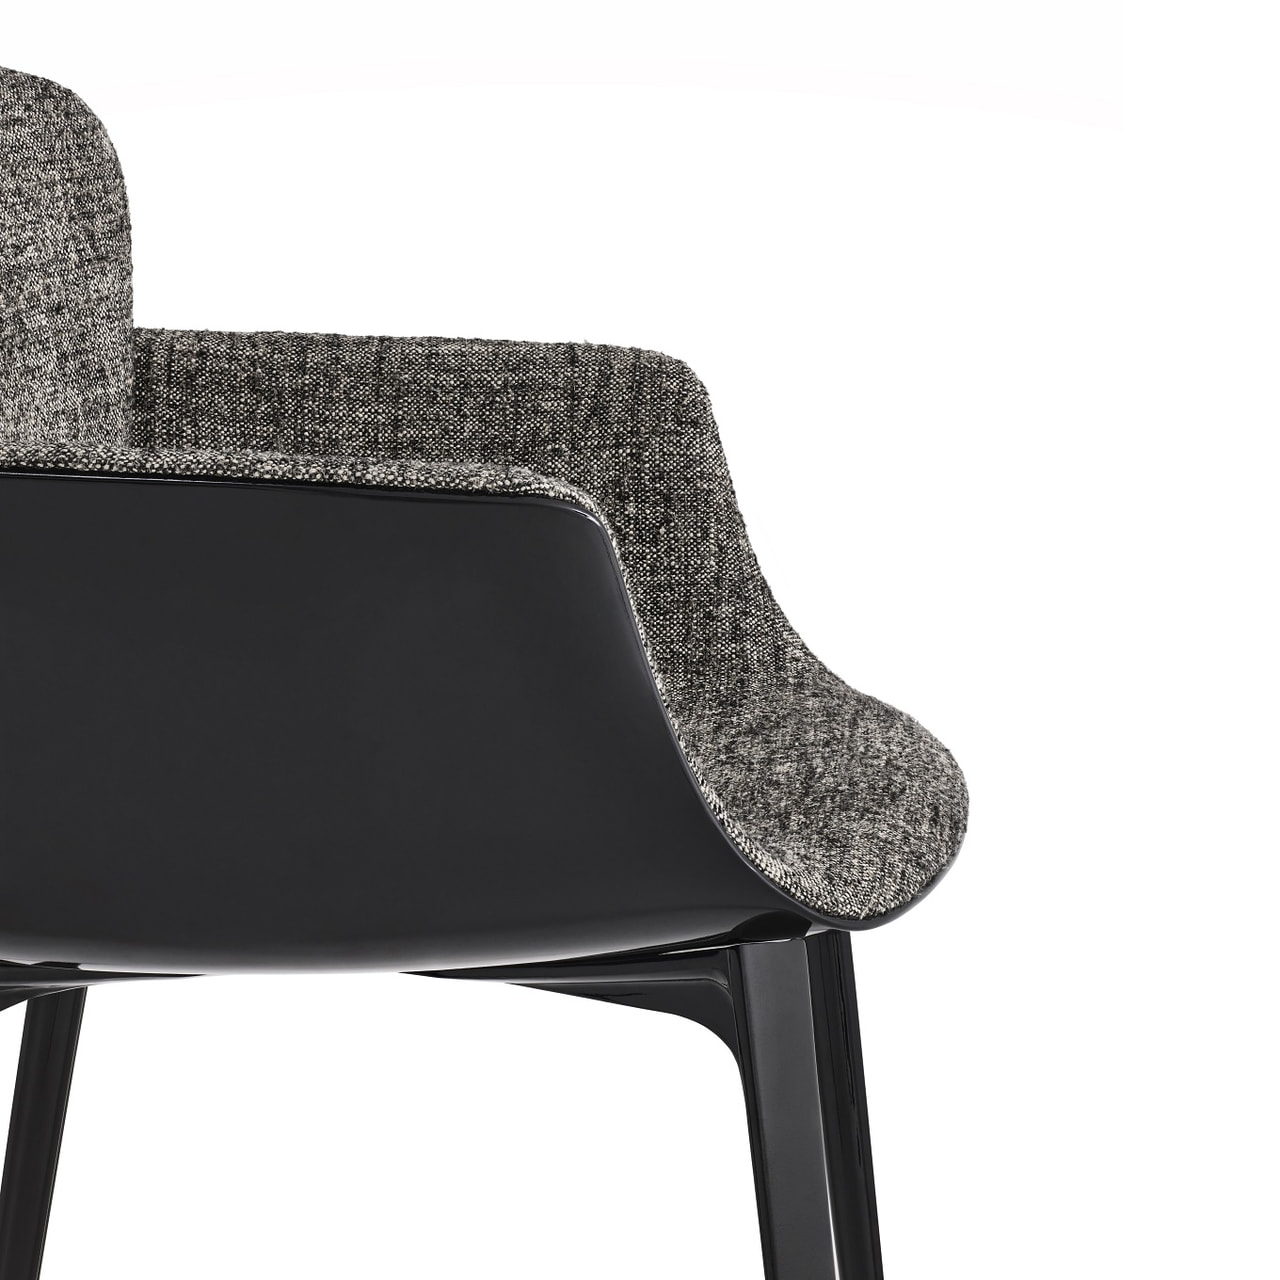 KN Collection by Knoll – KN 06 Armchair